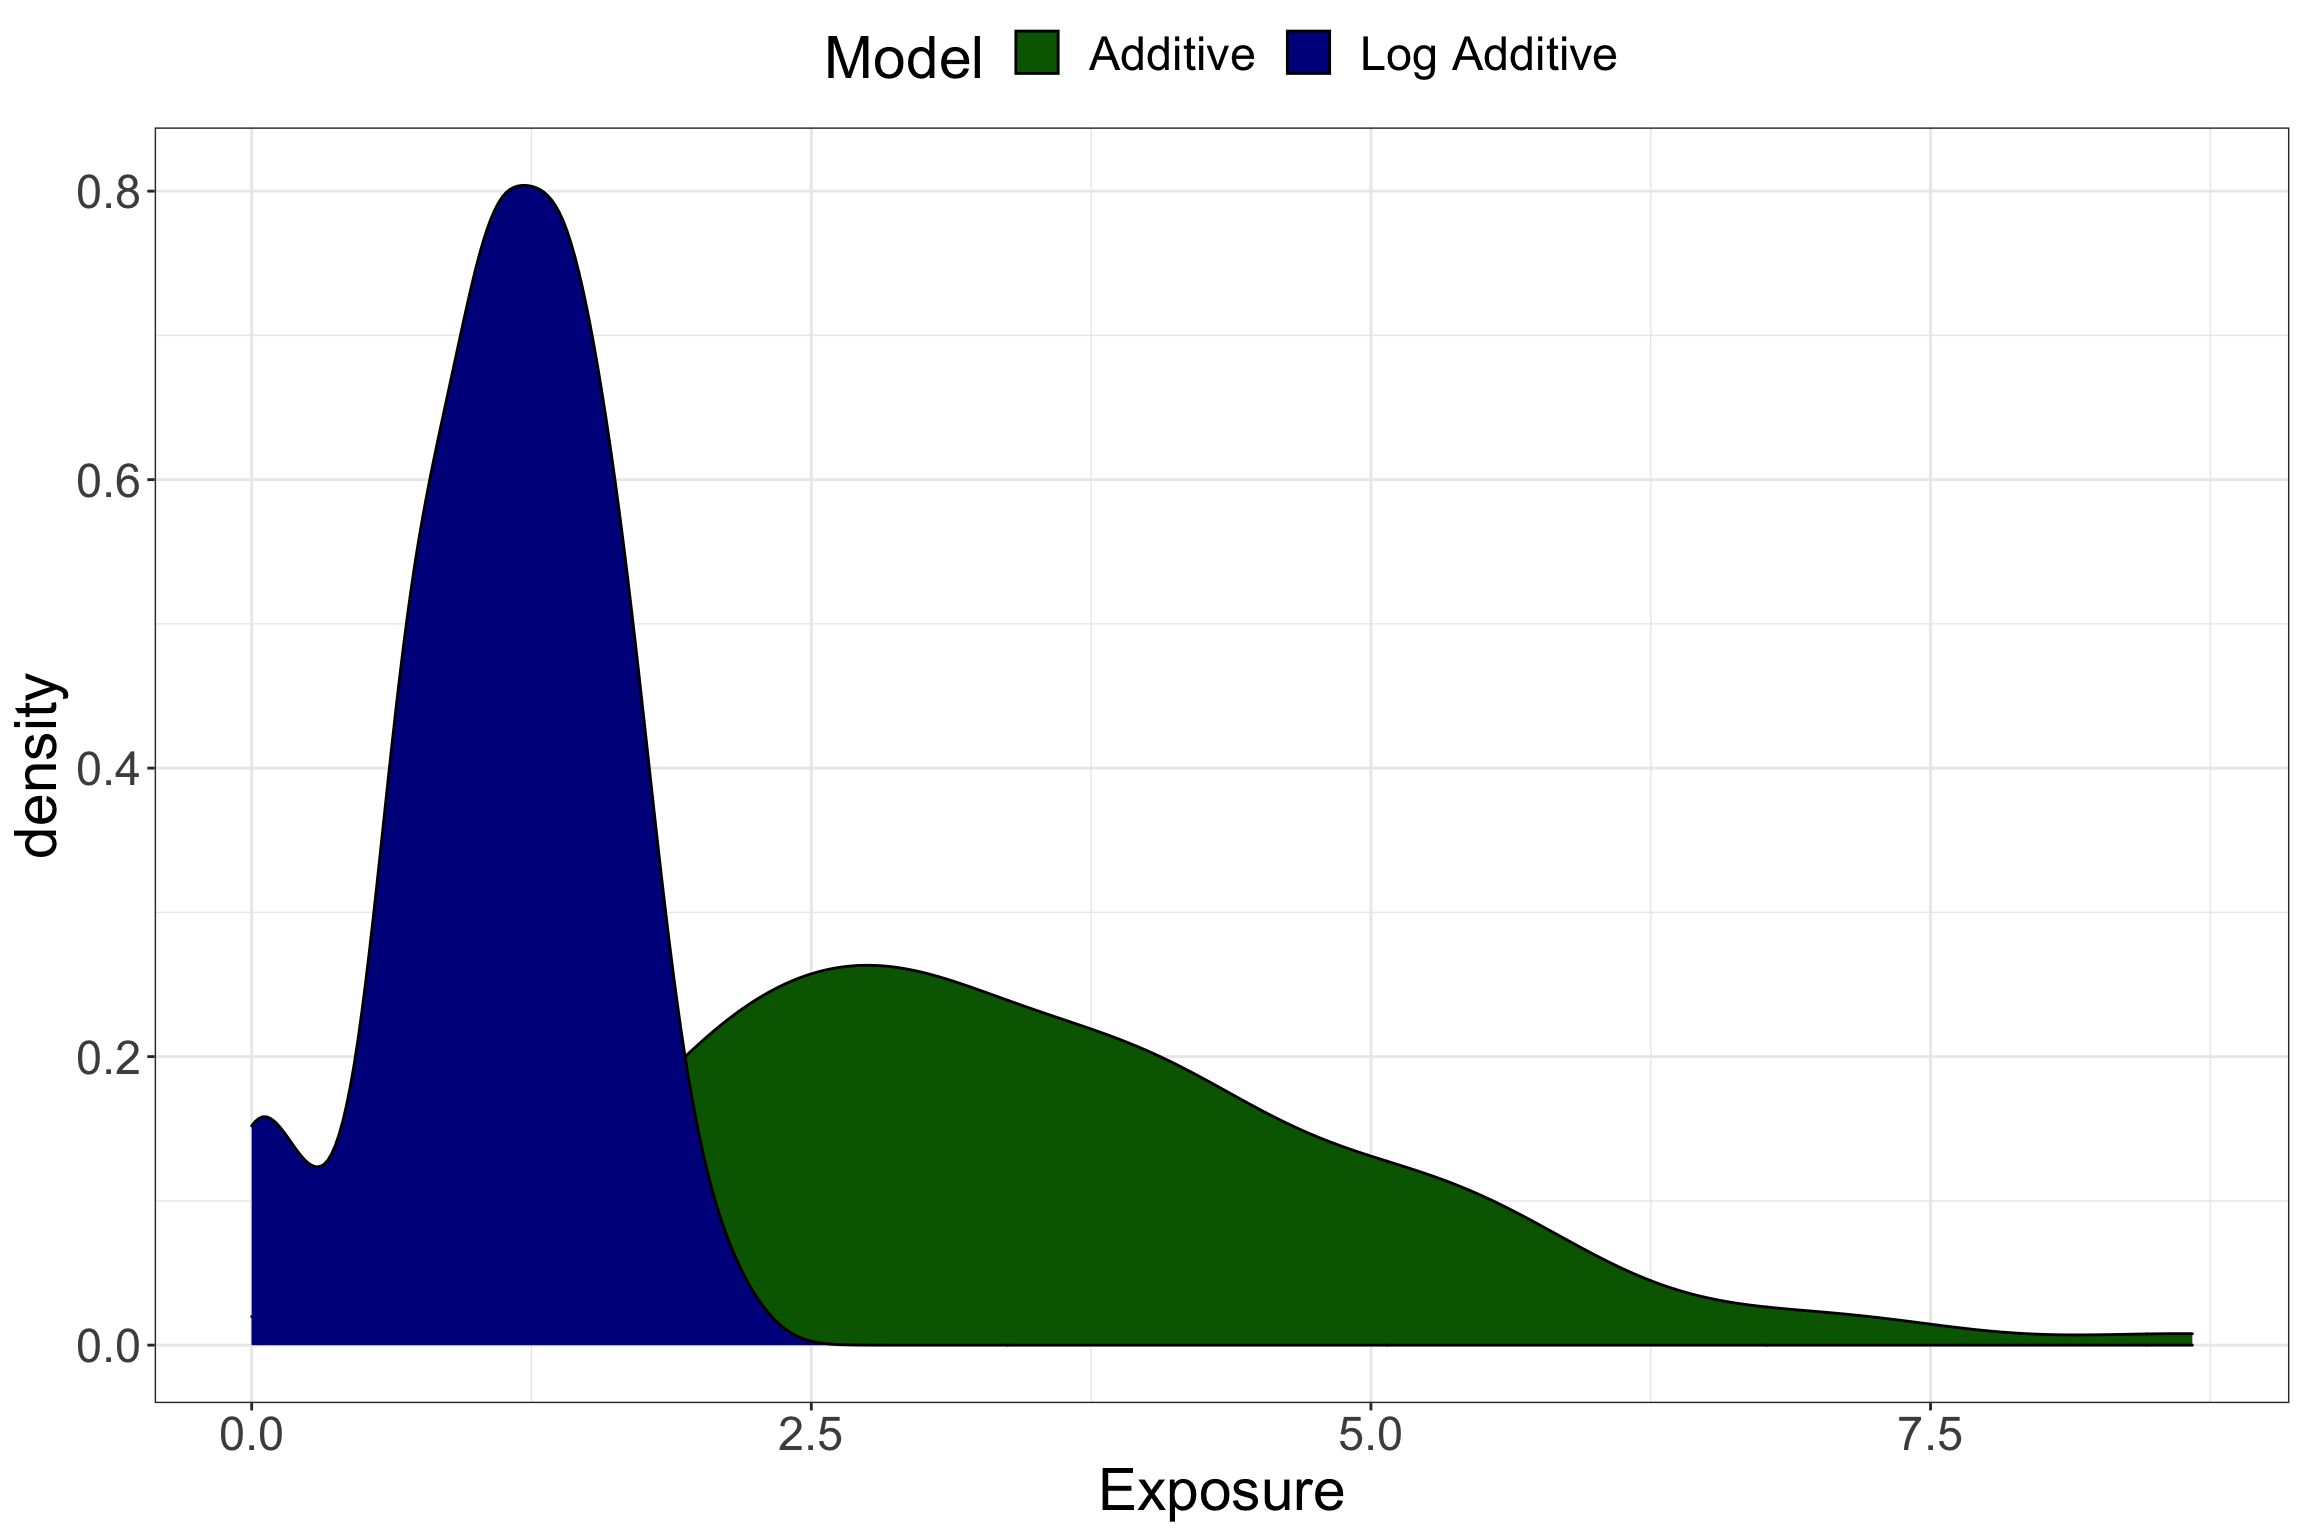 Differences in hypothetical exposures for additive vs. non-additive models.